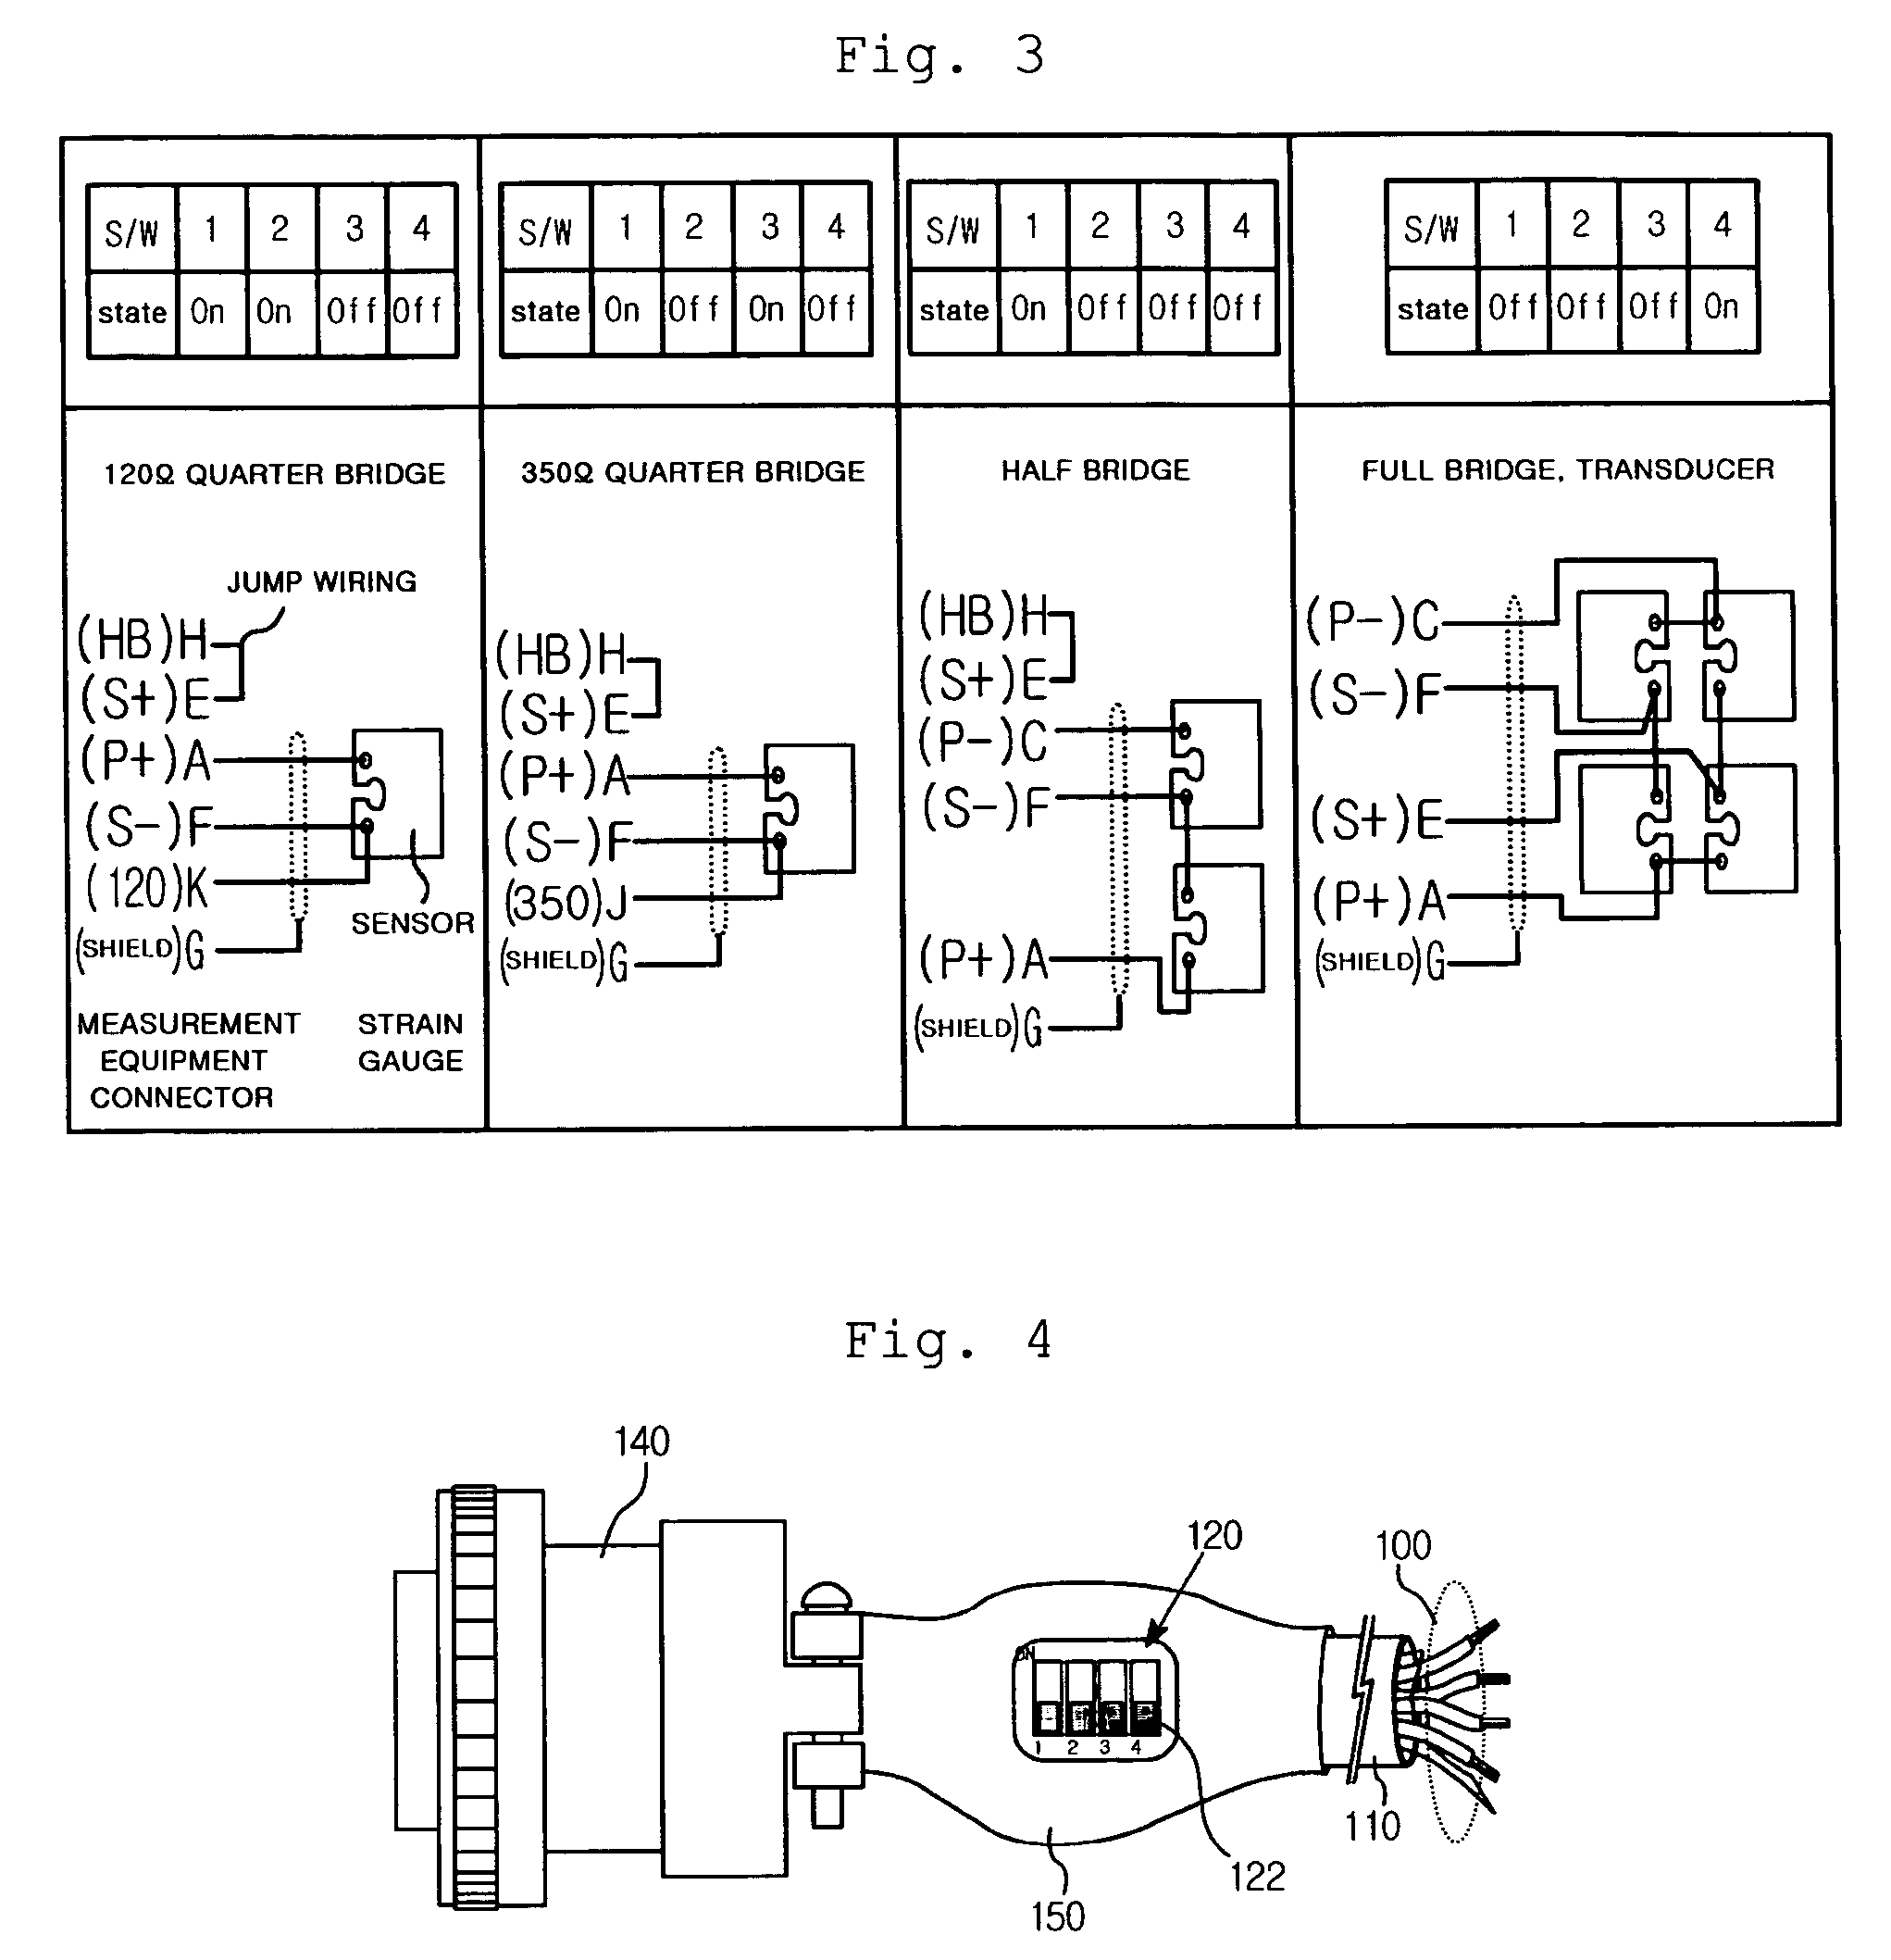 Cable connector for selective wiring